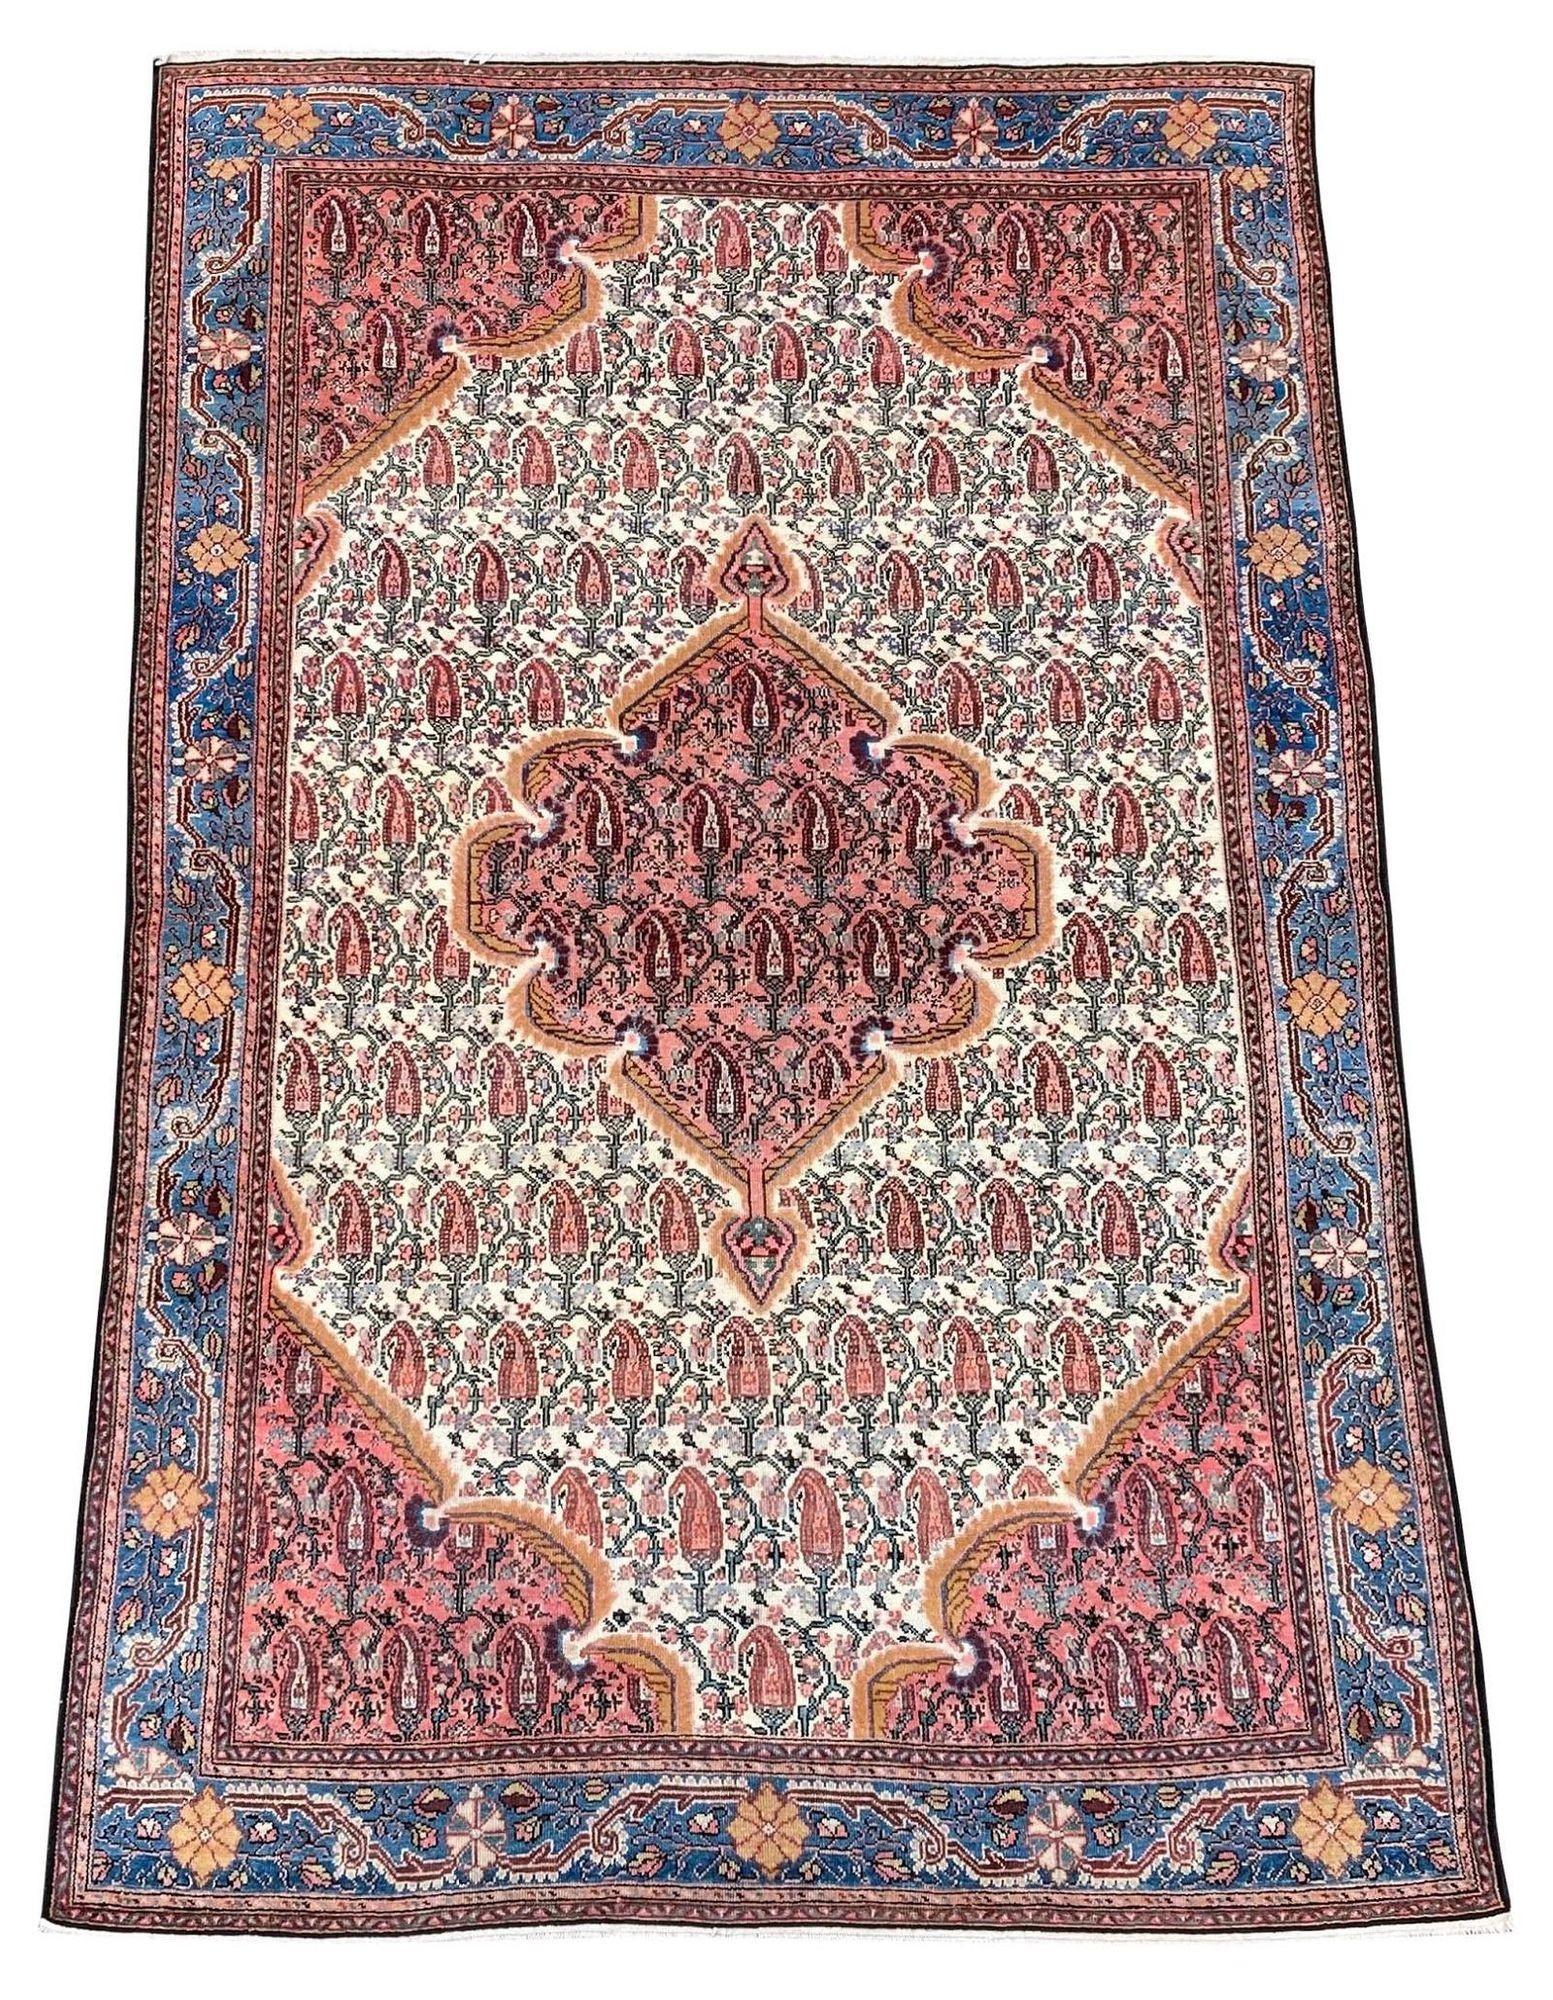 A lovely antique Malayer rug, handwoven circa 1900 with a linked Boteh medallion on an ivory field and attractive light blue border. Very finely woven with high quality wool and great secondary colours, particularly the combination of pink and